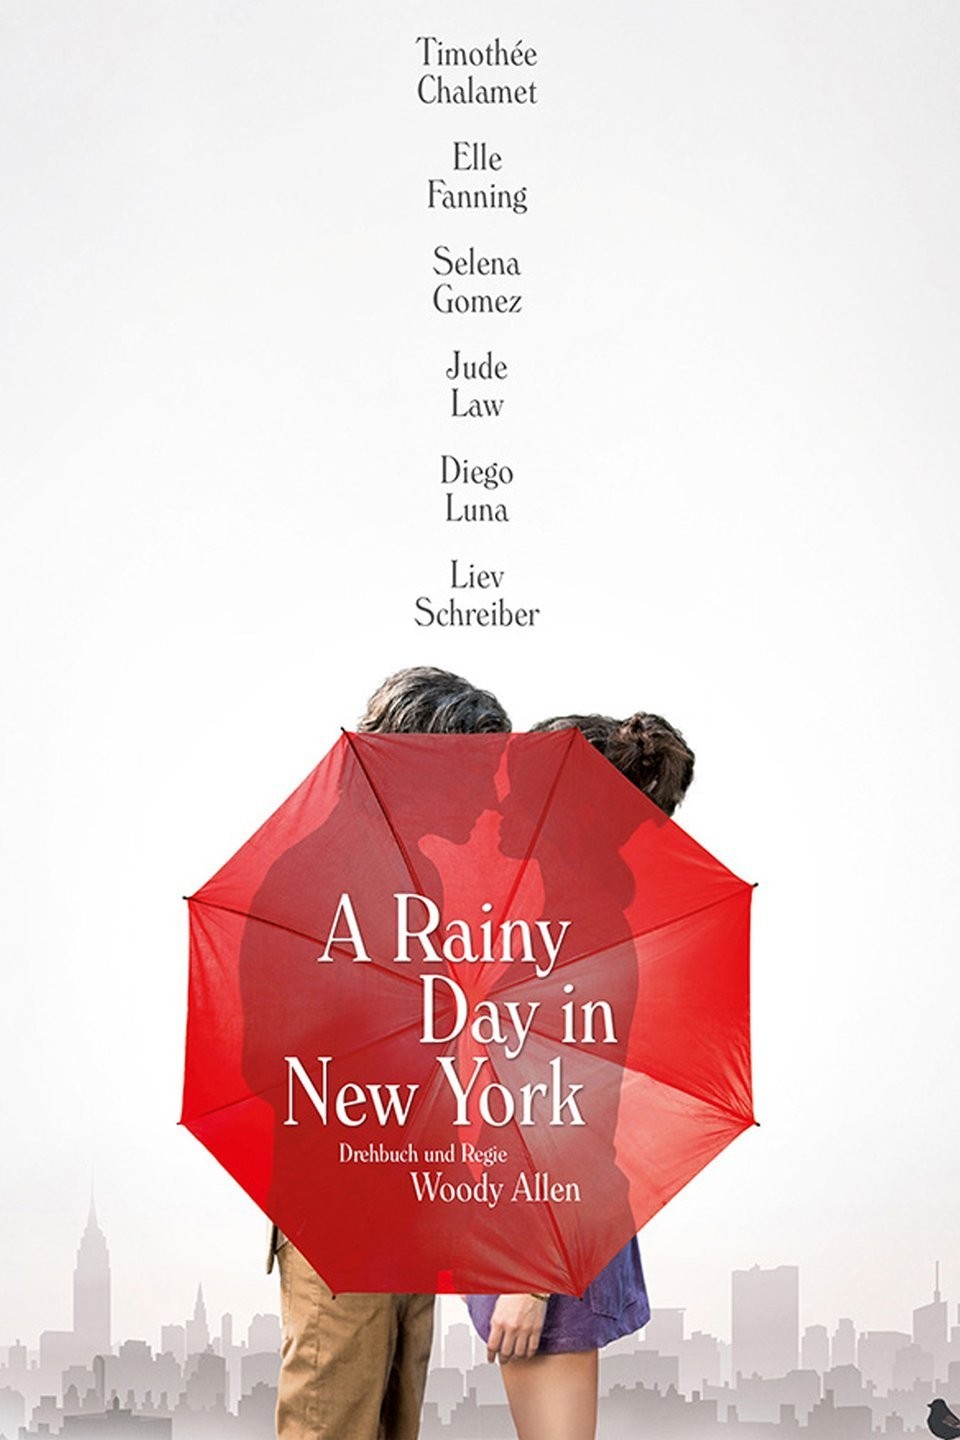 What to Do in New York on a Rainy Day